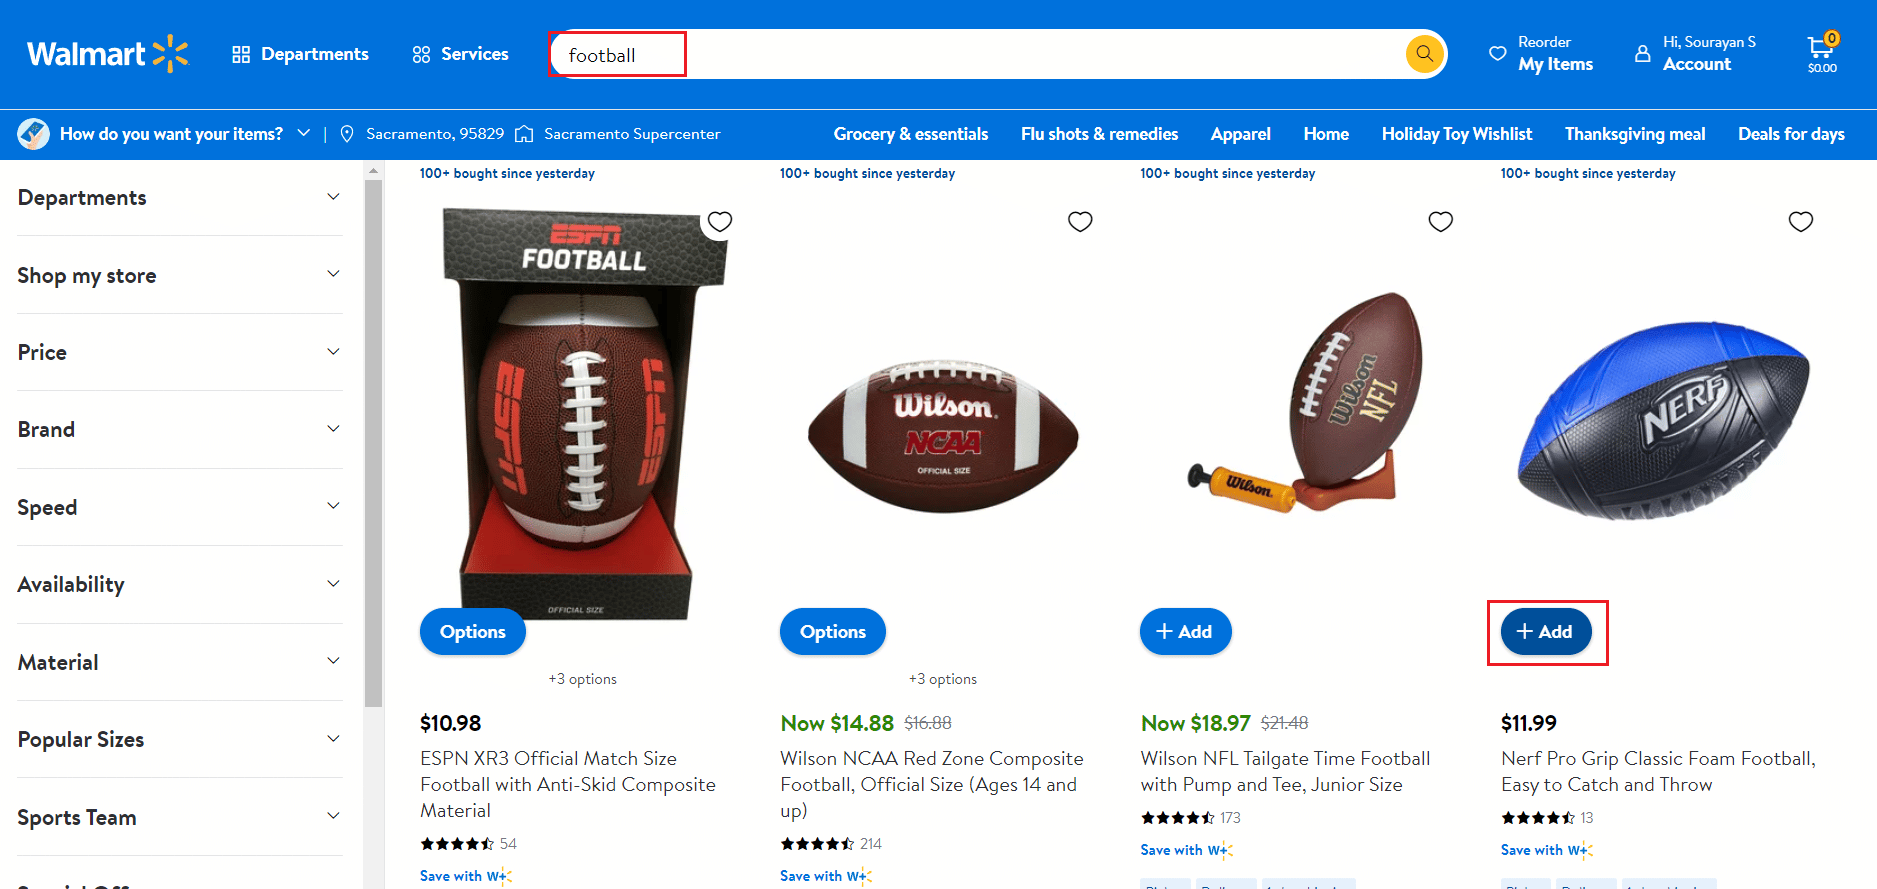 Search for the desired item and click on the Add option | place an online order from Walmart